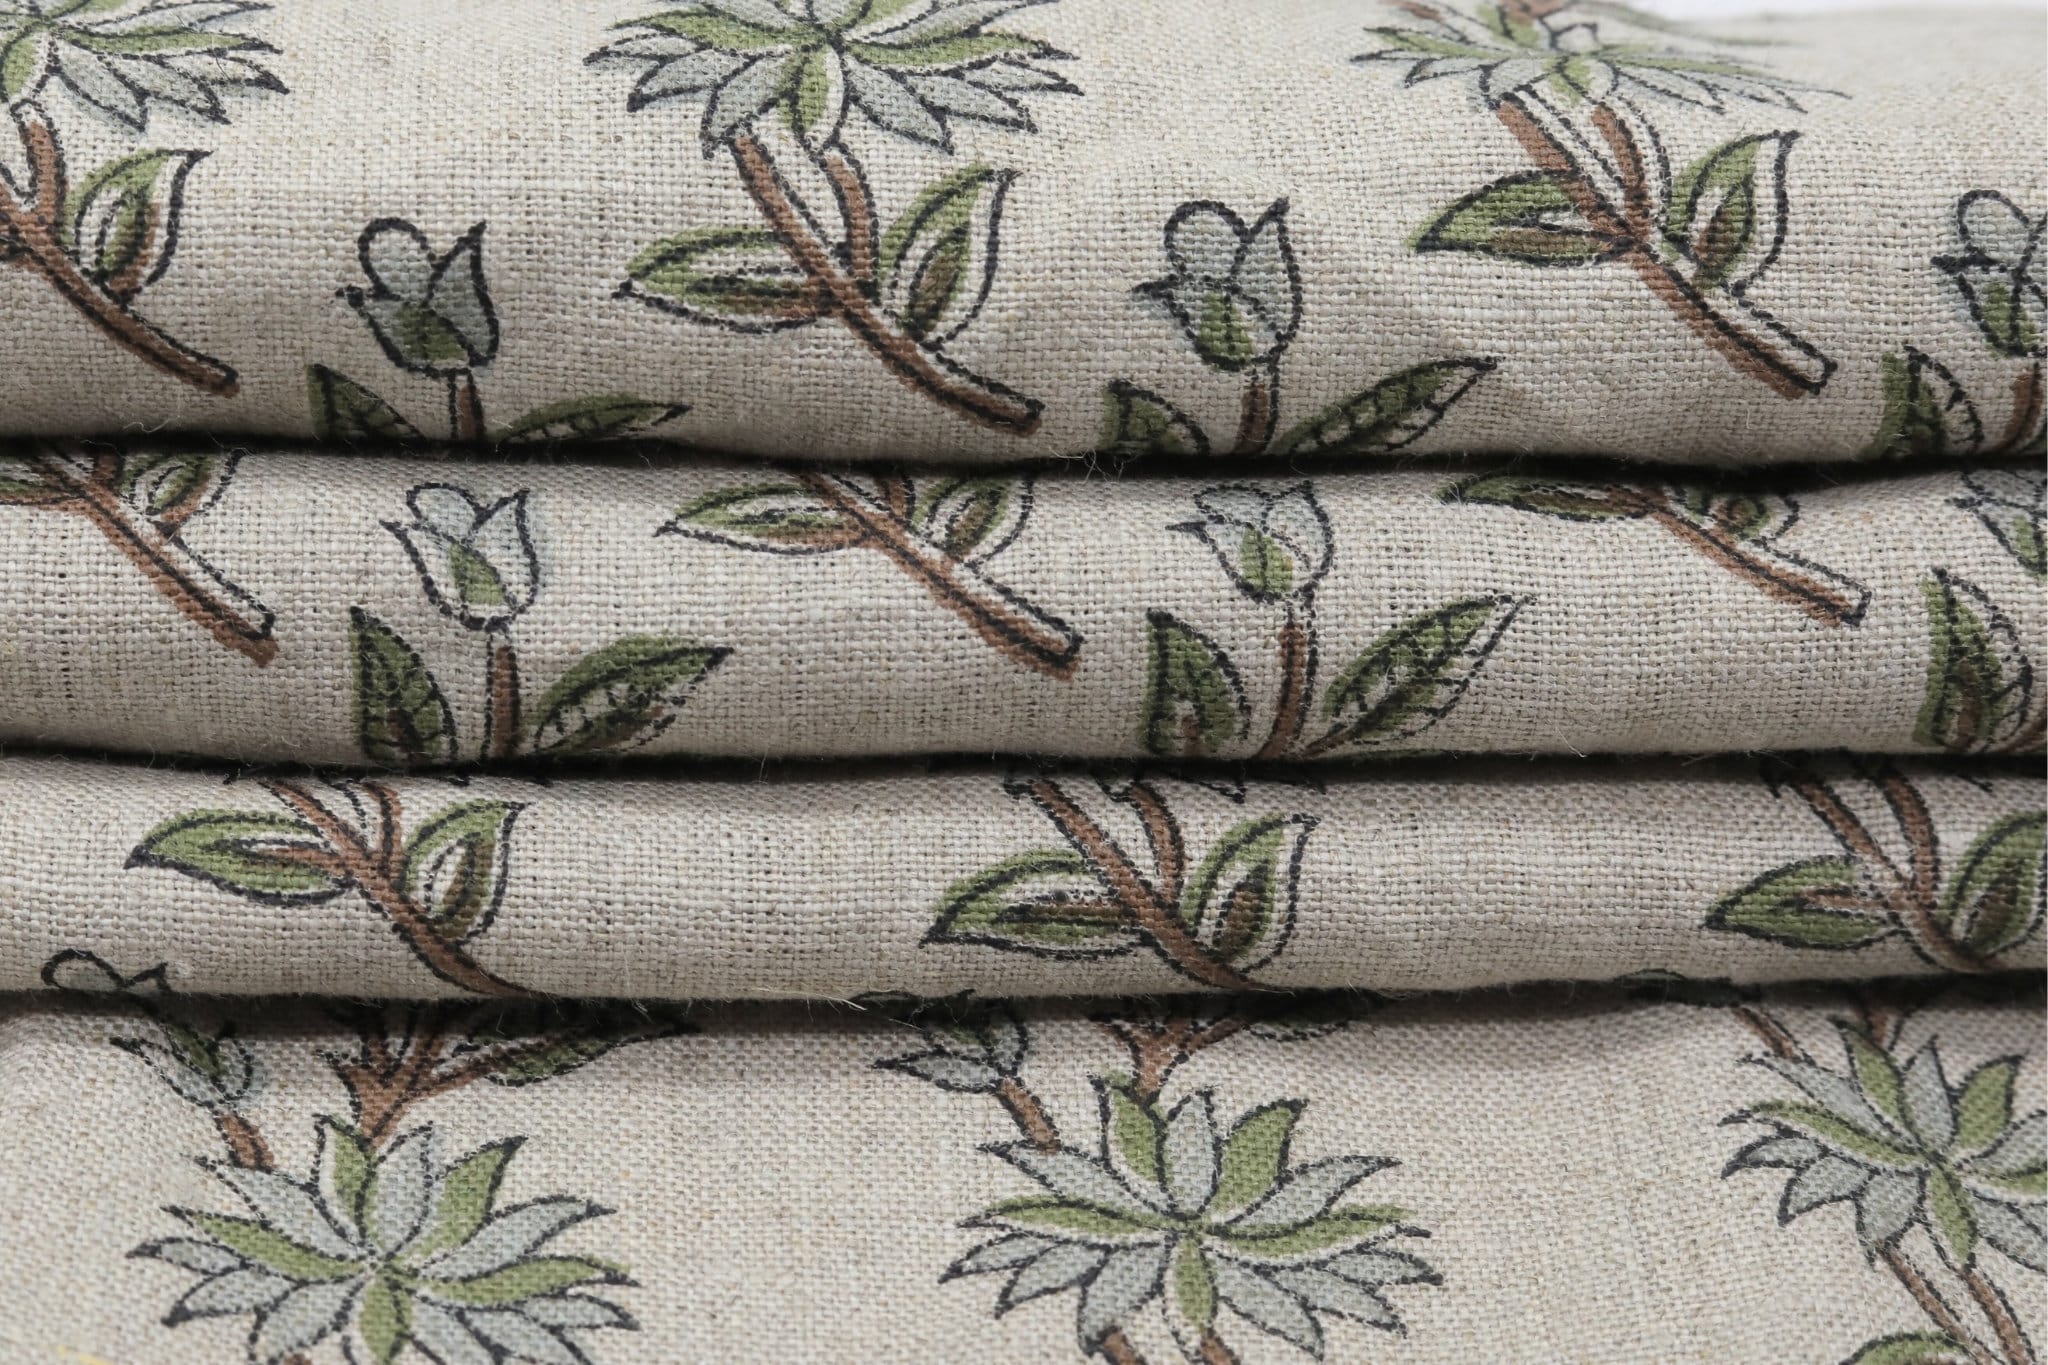 Linen block print fabric for window curtains and couch cover, pillow cover. lampshade, Indian handmade floral art - DEEPIKA